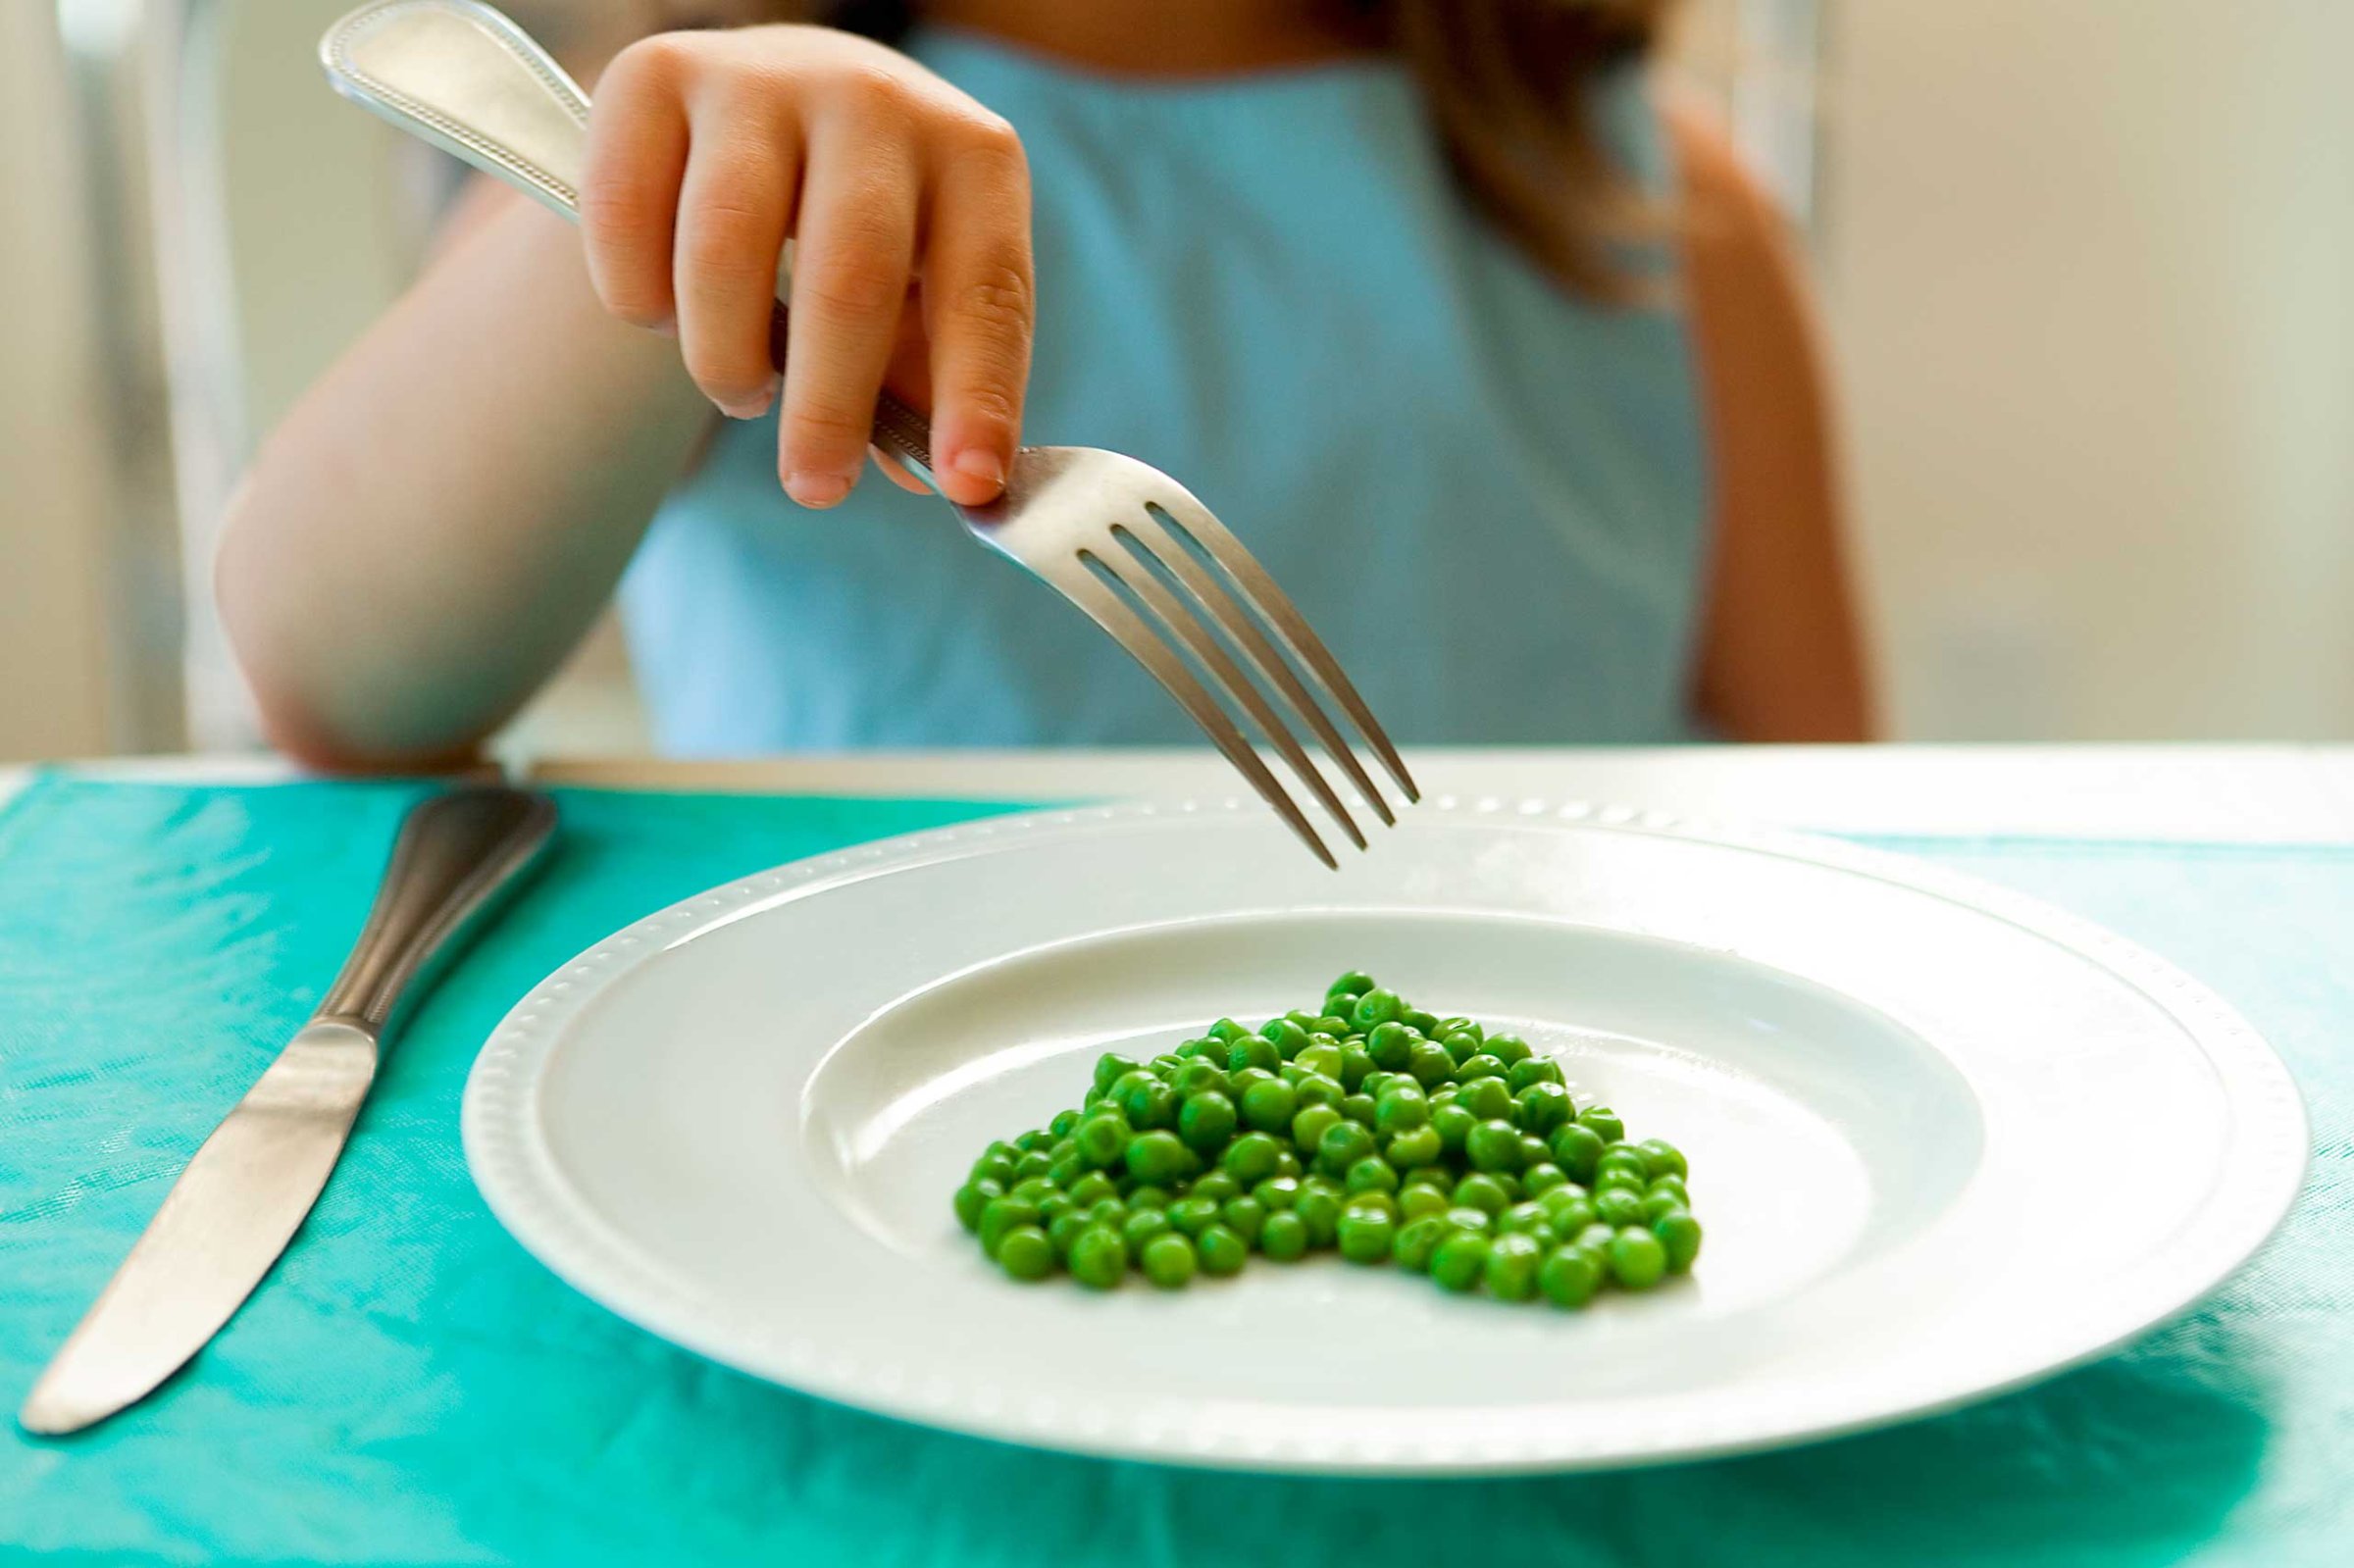 Girl eating green peas with a fork